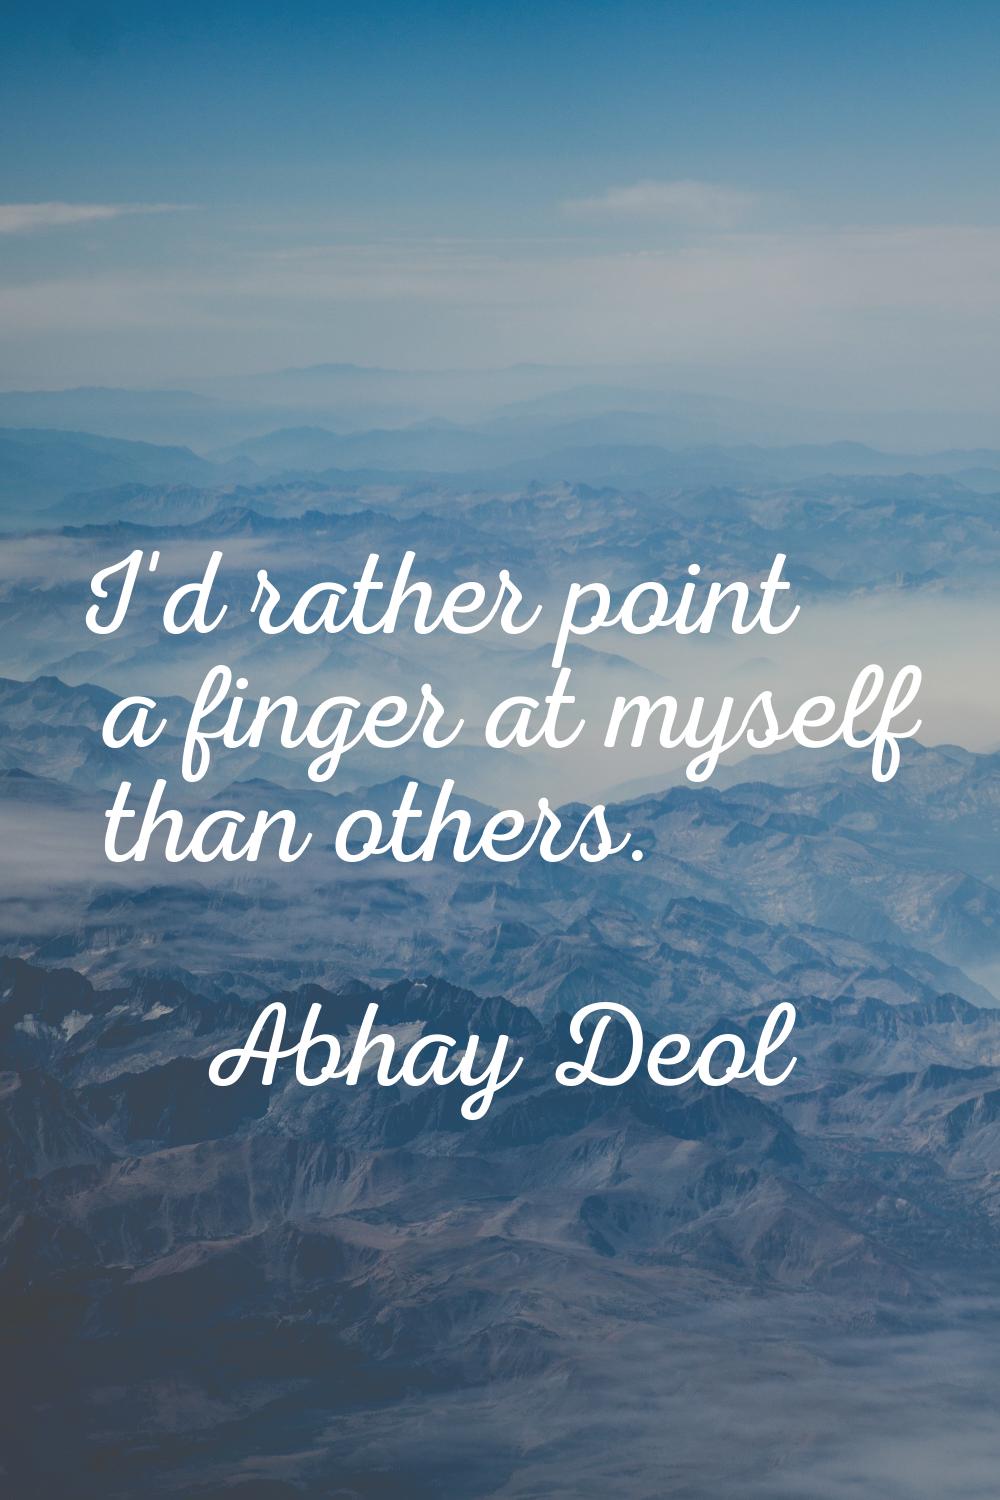 I'd rather point a finger at myself than others.